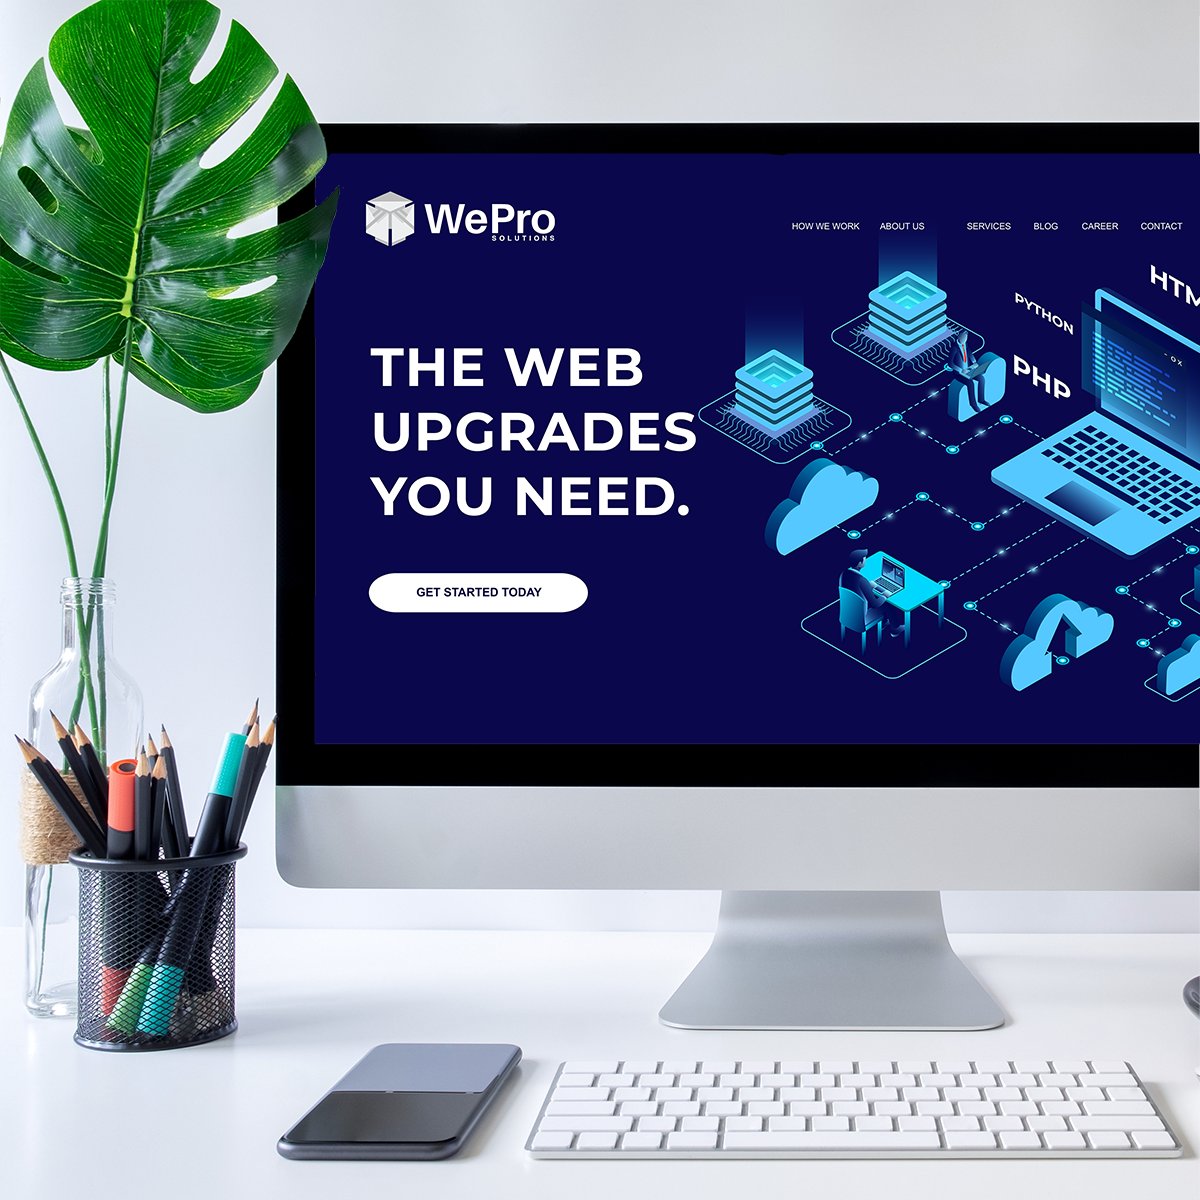 A good website is all about the having the right design. When you work with us, we’ll make sure your site is on brand and functional for you and your audience. Click below to see more about our web services and how we can serve you! wepro-solutions.com/services/ #webdesign